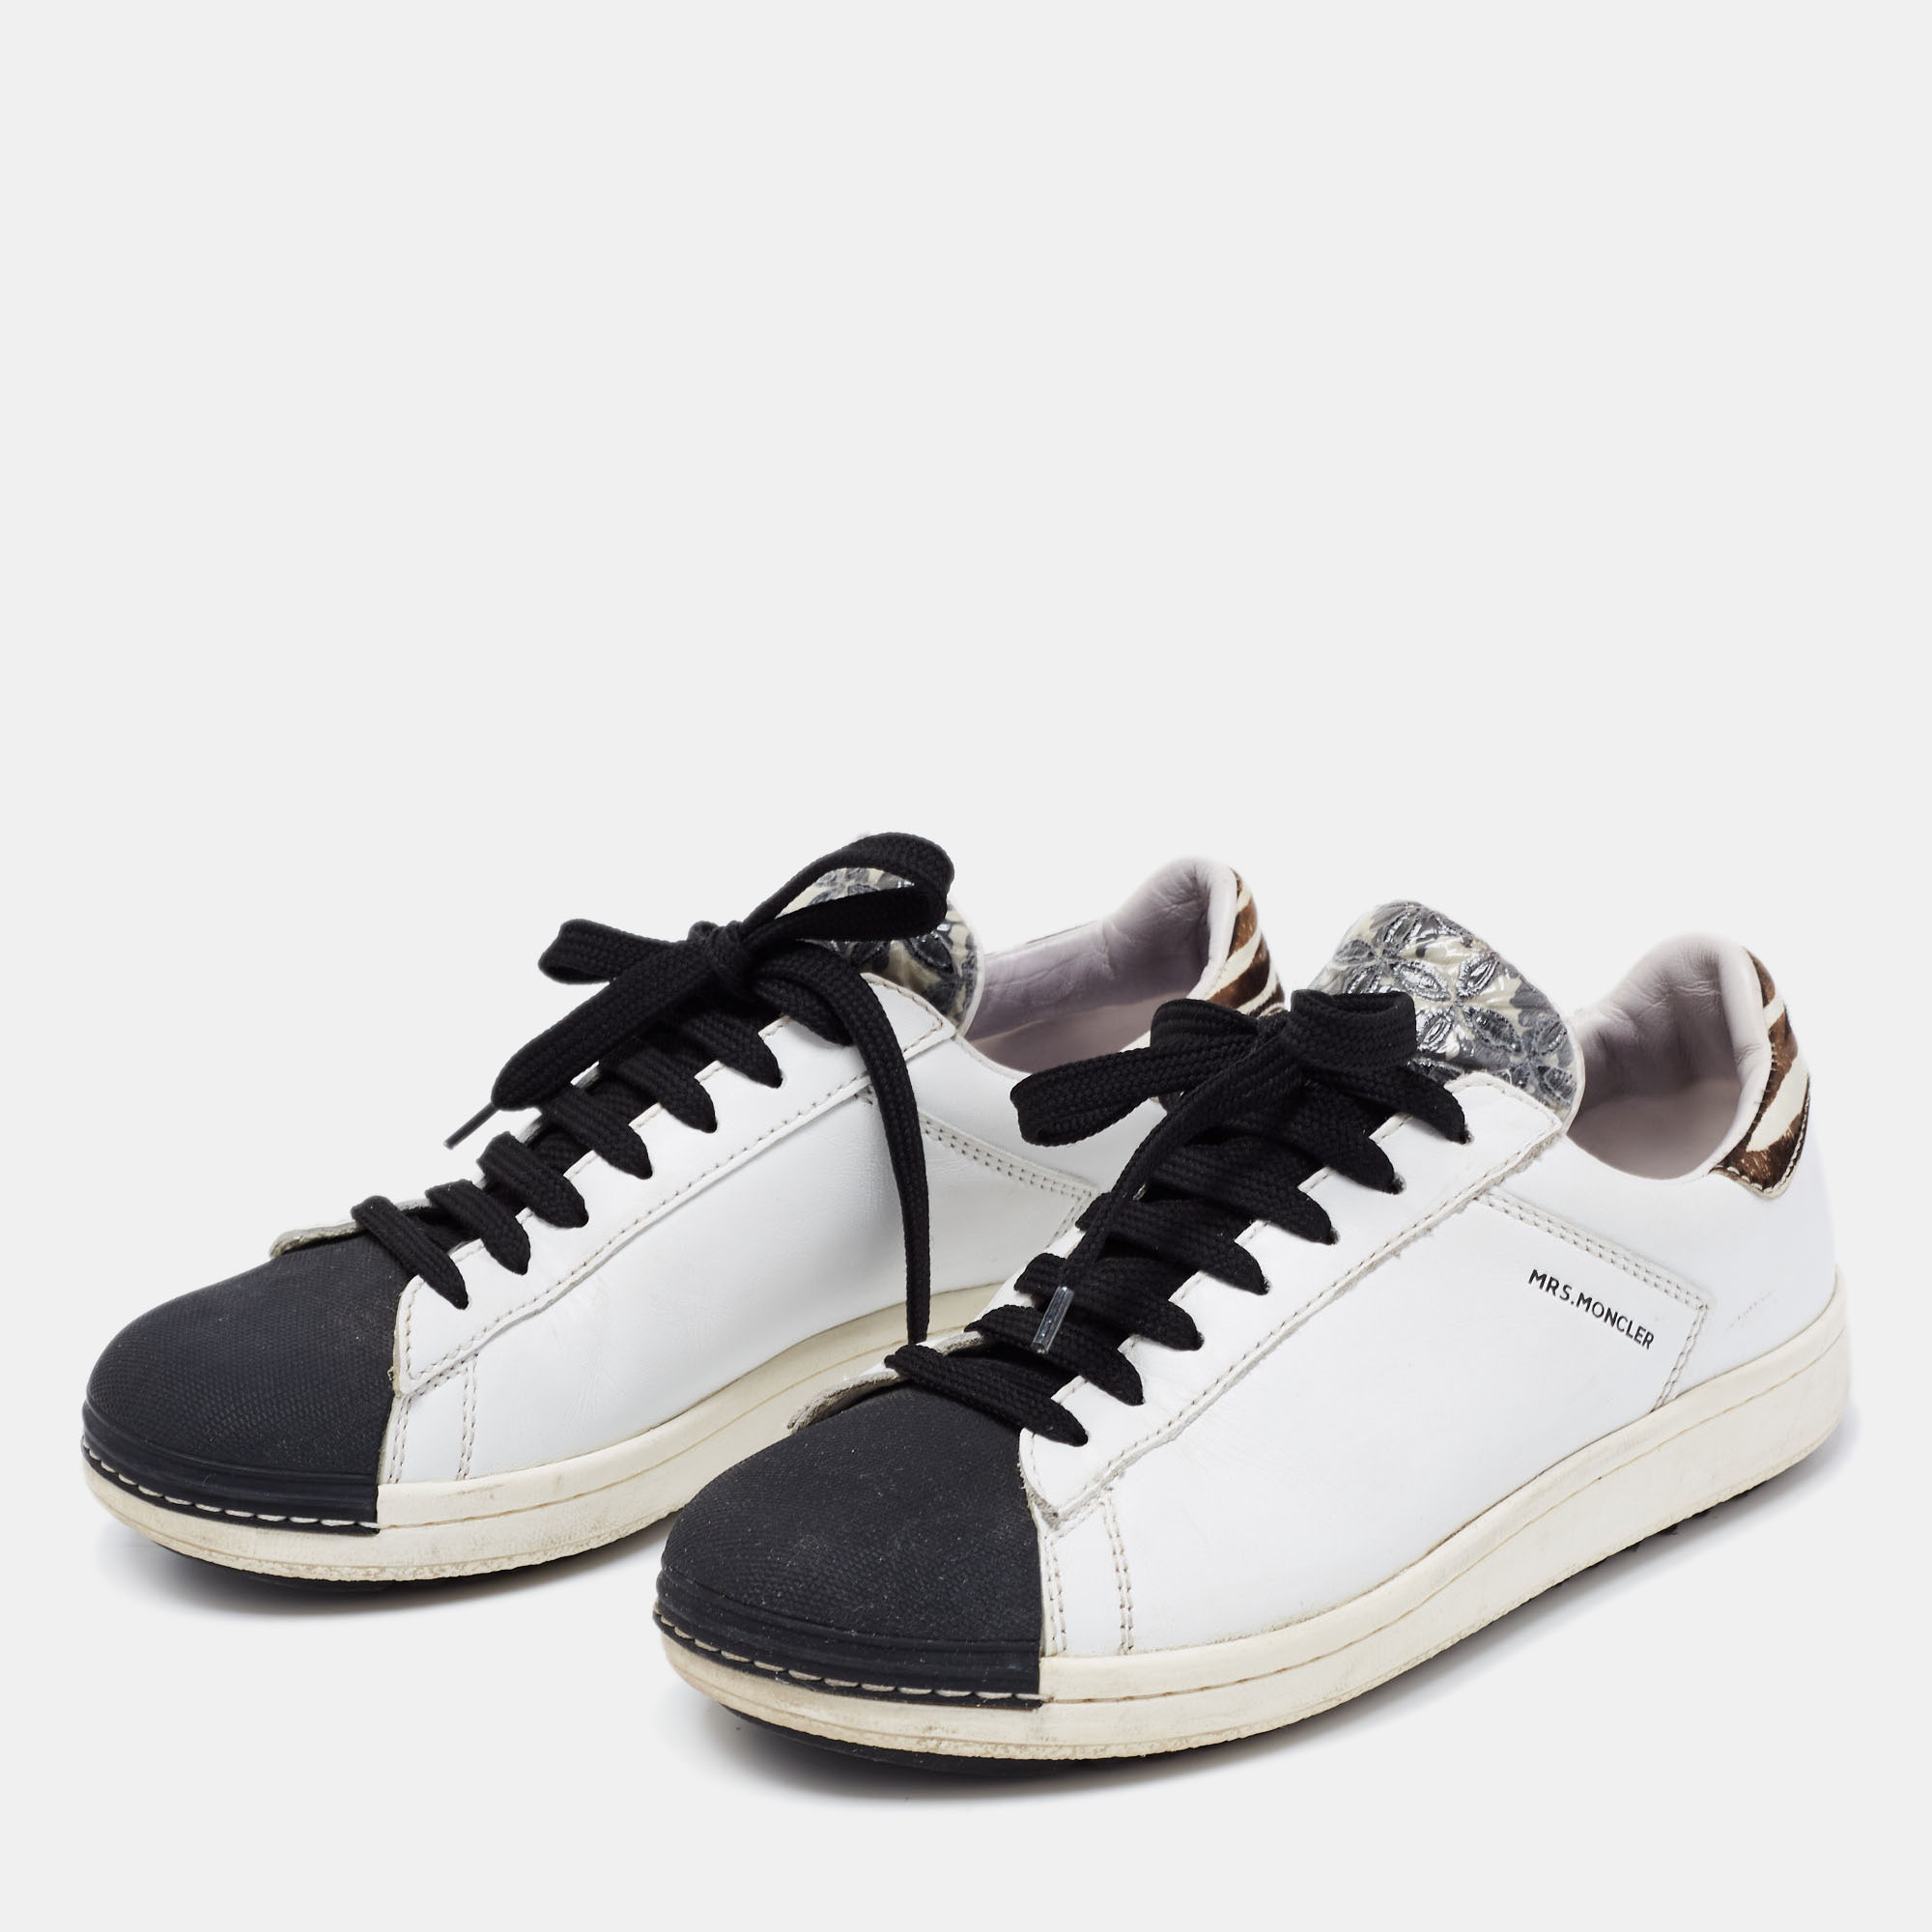 

Moncler Black/White Leather Low Top Sneakers Size